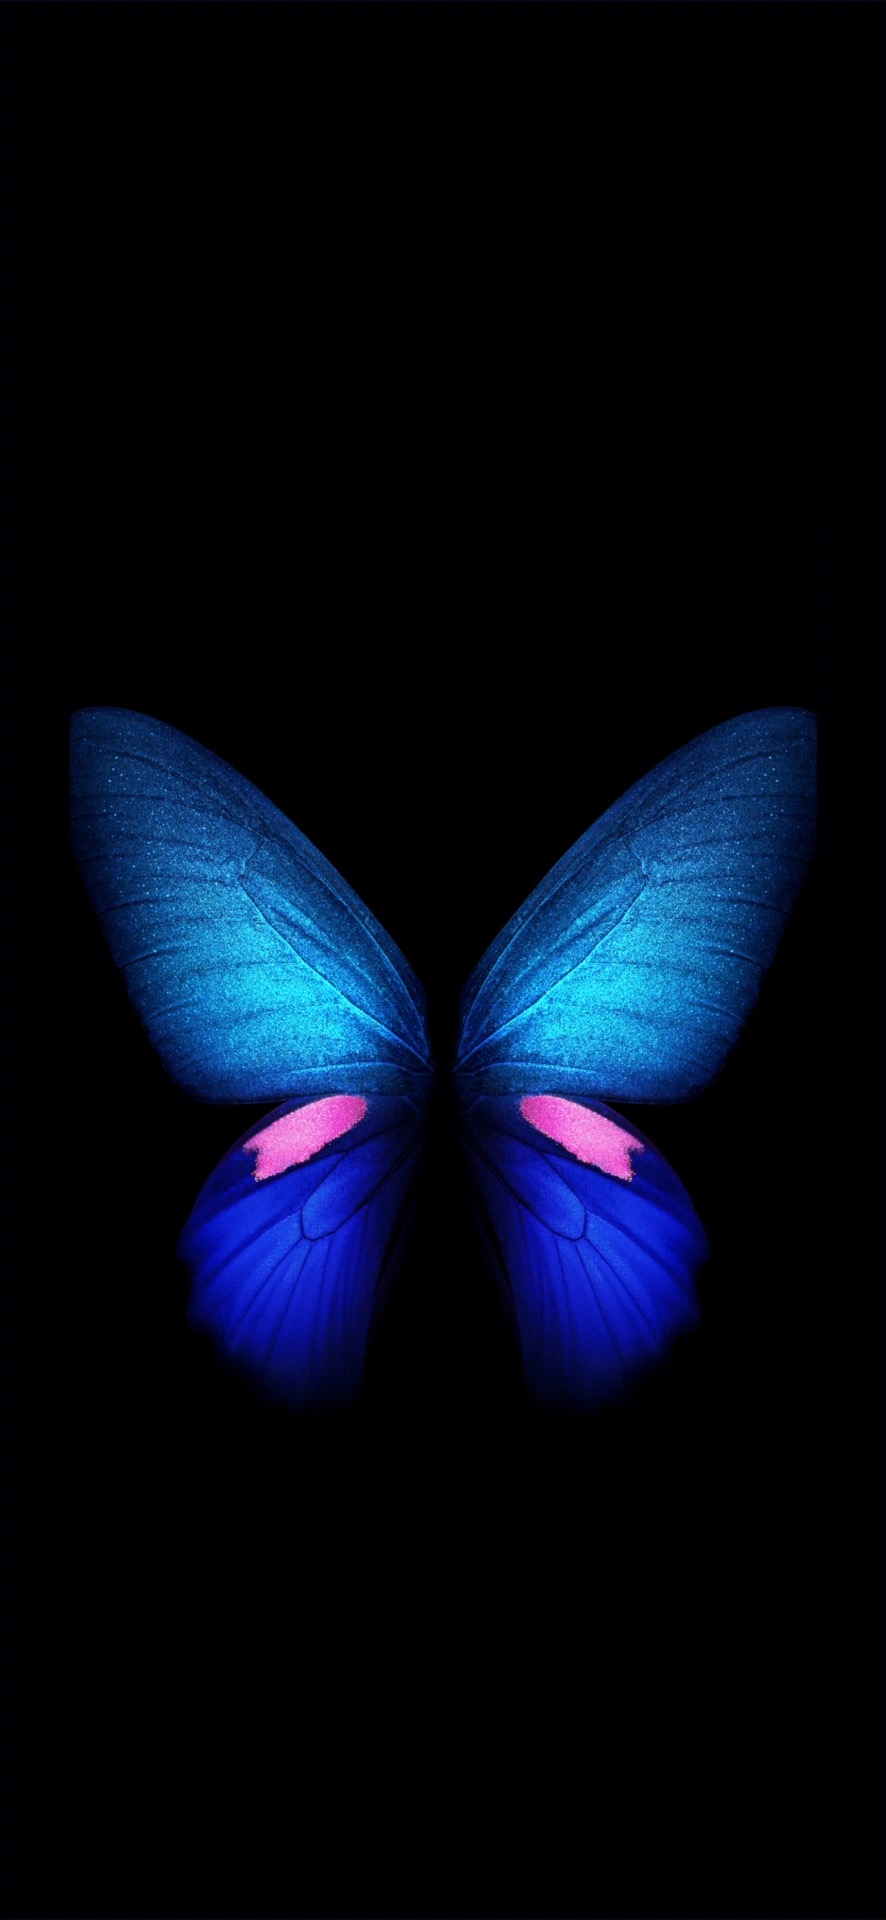 Butterfly - Galaxy Fold (Blue) | LIVE Wallpaper - Wallpapers Central